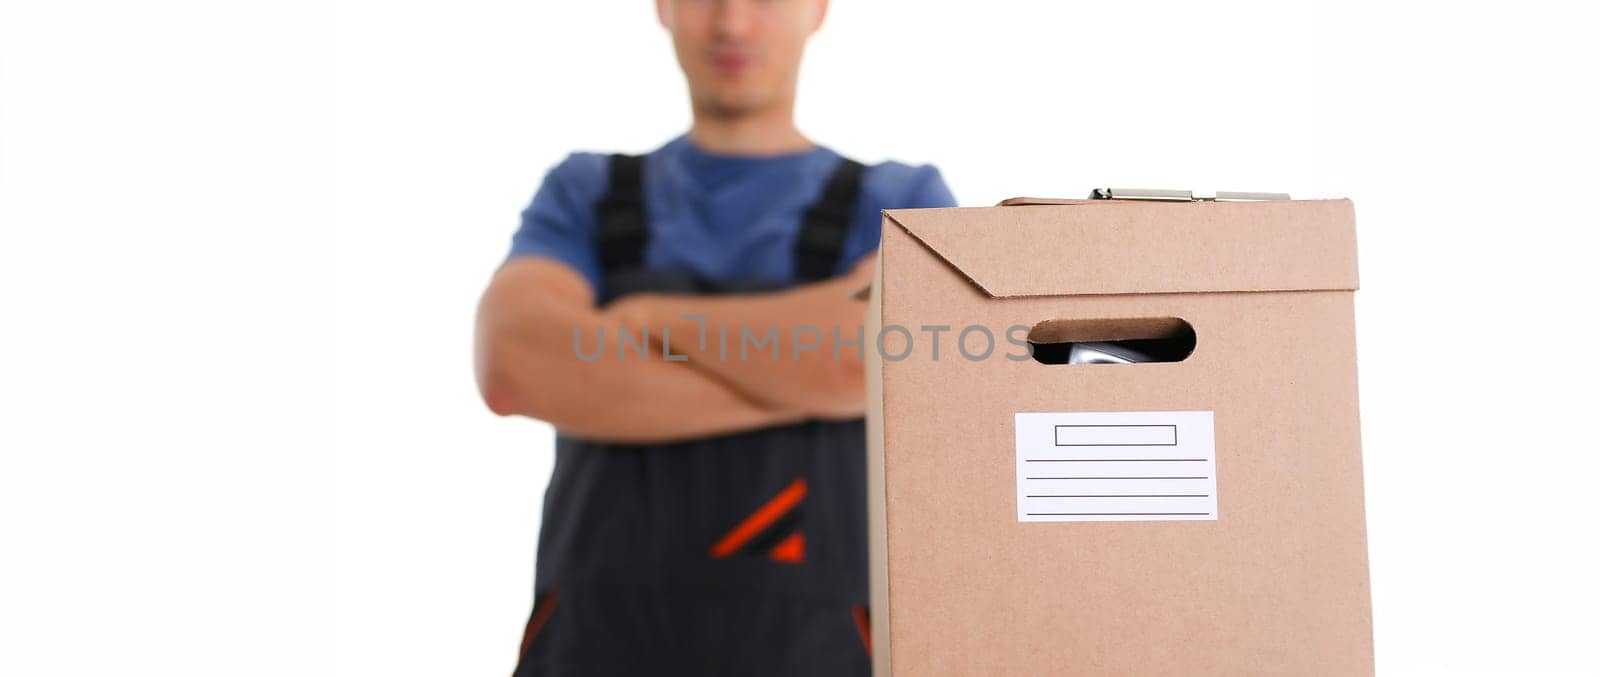 Specialist courier delivery service carries boxes with parcels things of customers working as a loader delivers everything to the specified addresses, ready to fulfill any order at a specified time